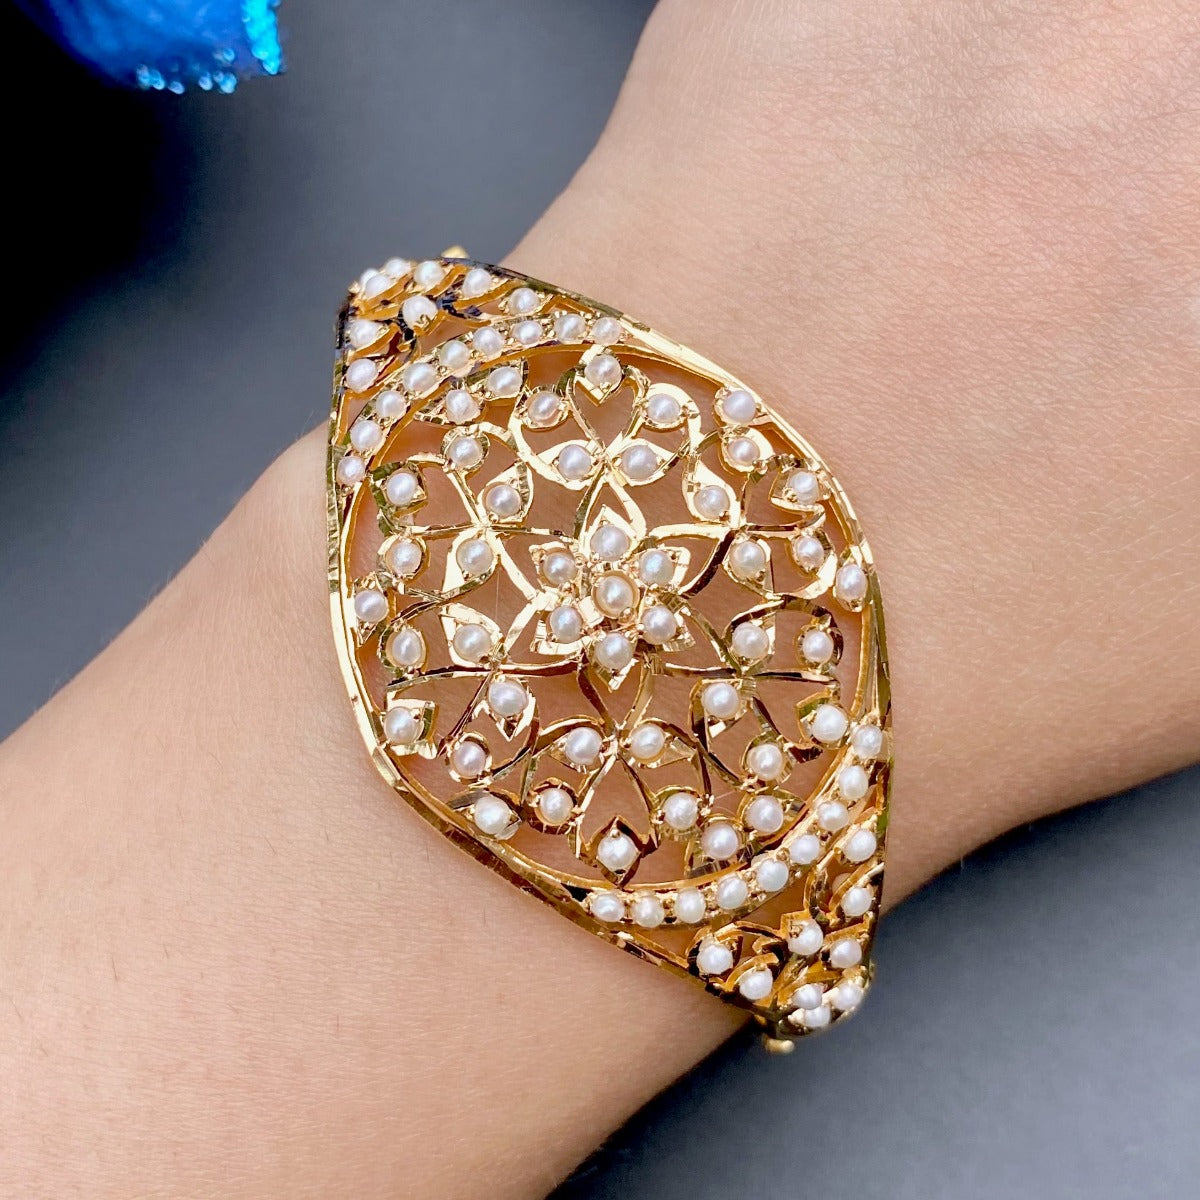 22k gold bracelet studded with pearls